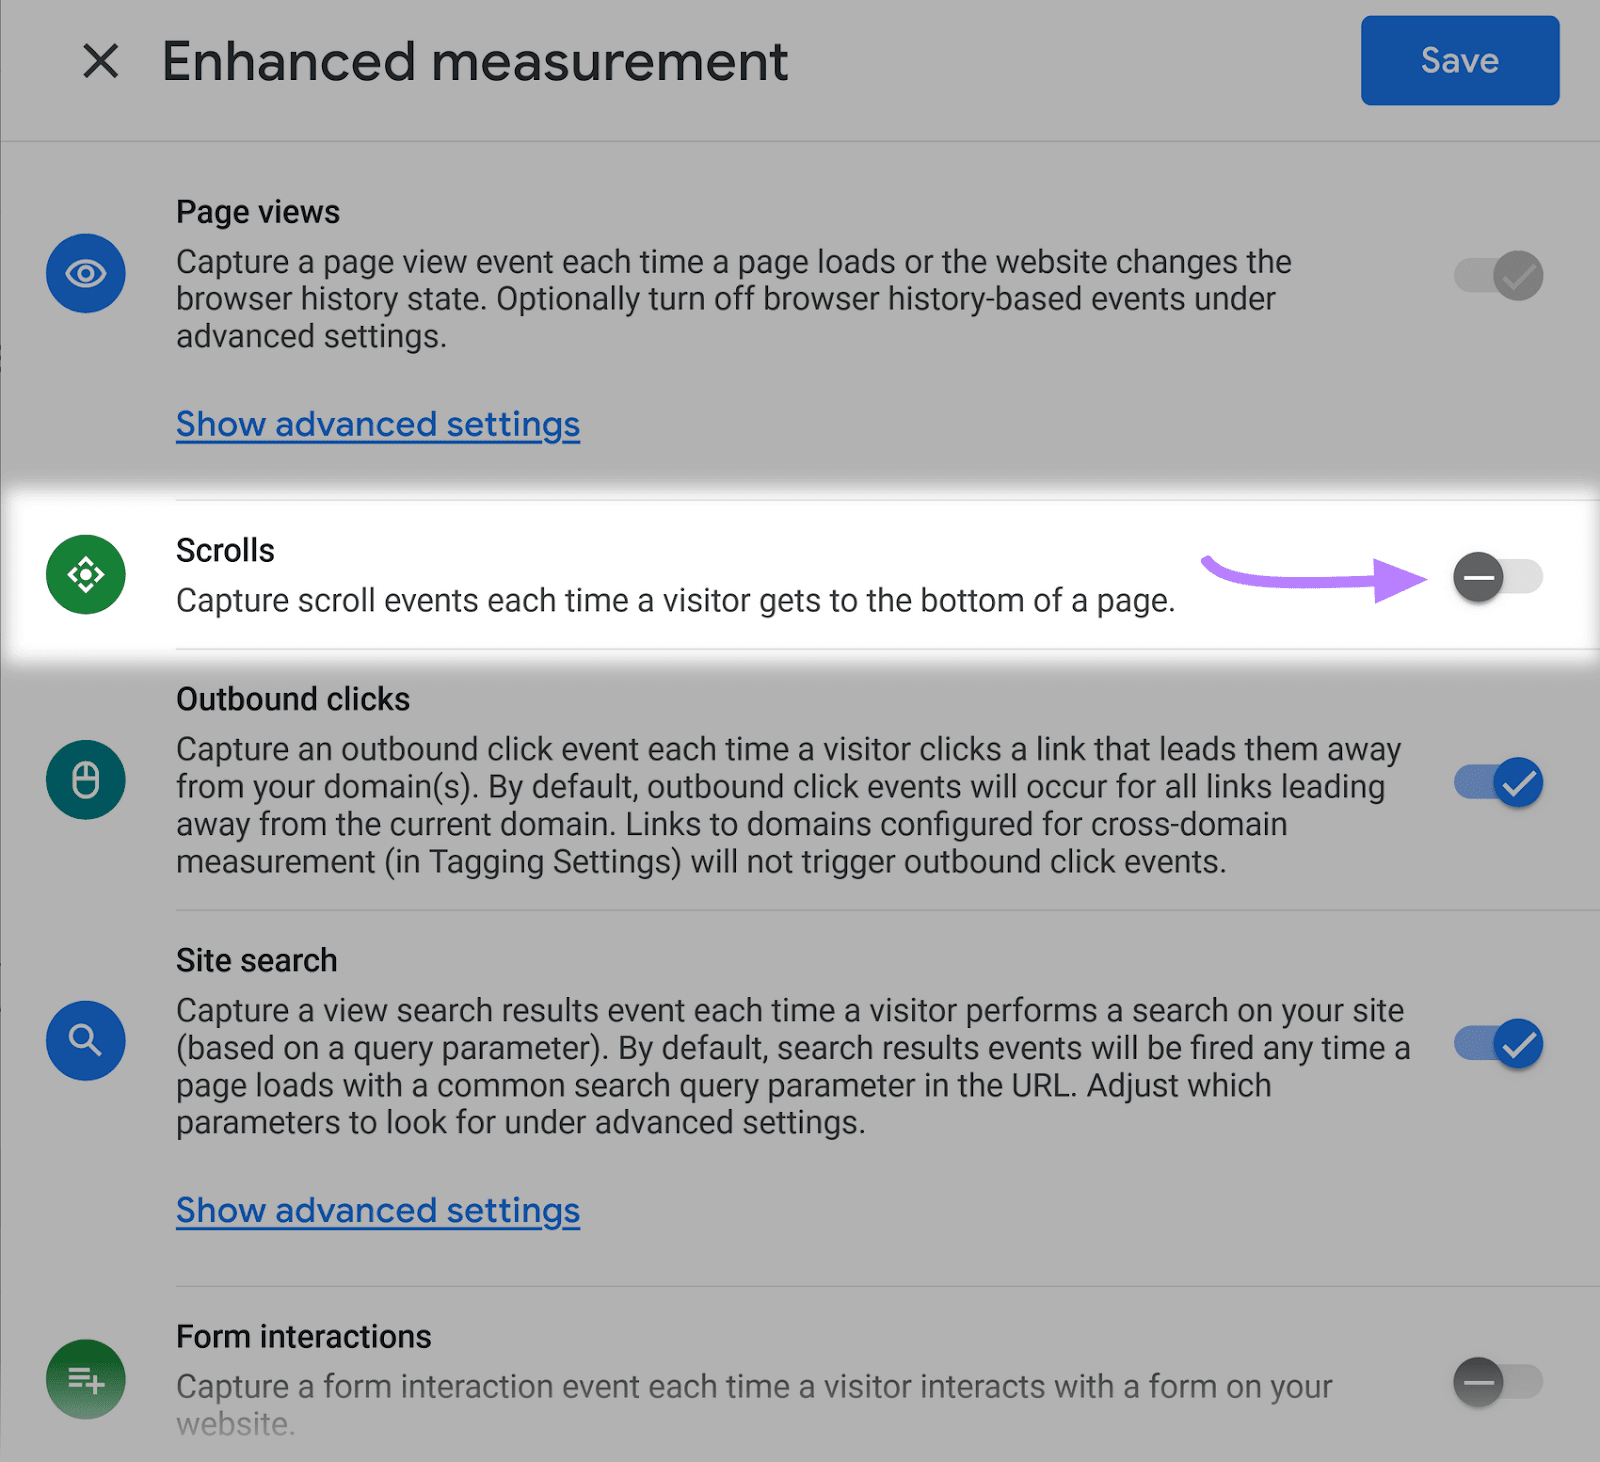 Activate “Scrolls” switch under "Enhanced measurement" section